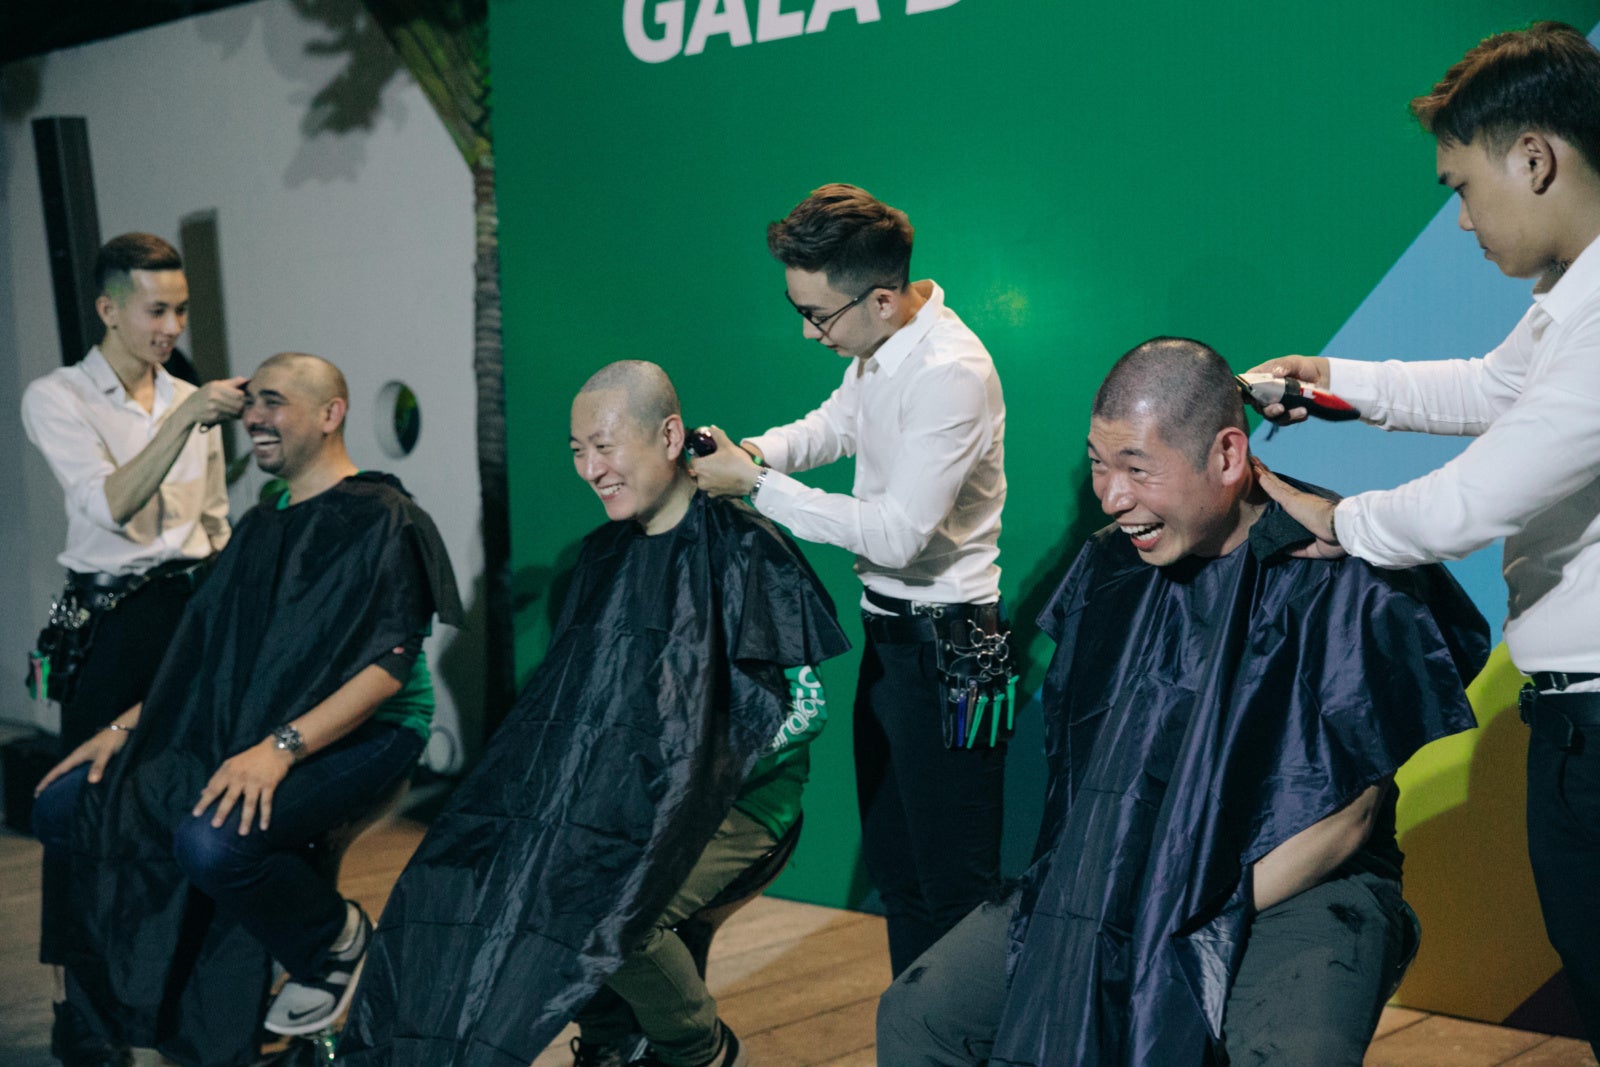 Grab CEO Shaves Head For Children With Cancer, Breaks Record After Raising RM607K - WORLD OF BUZZ 2